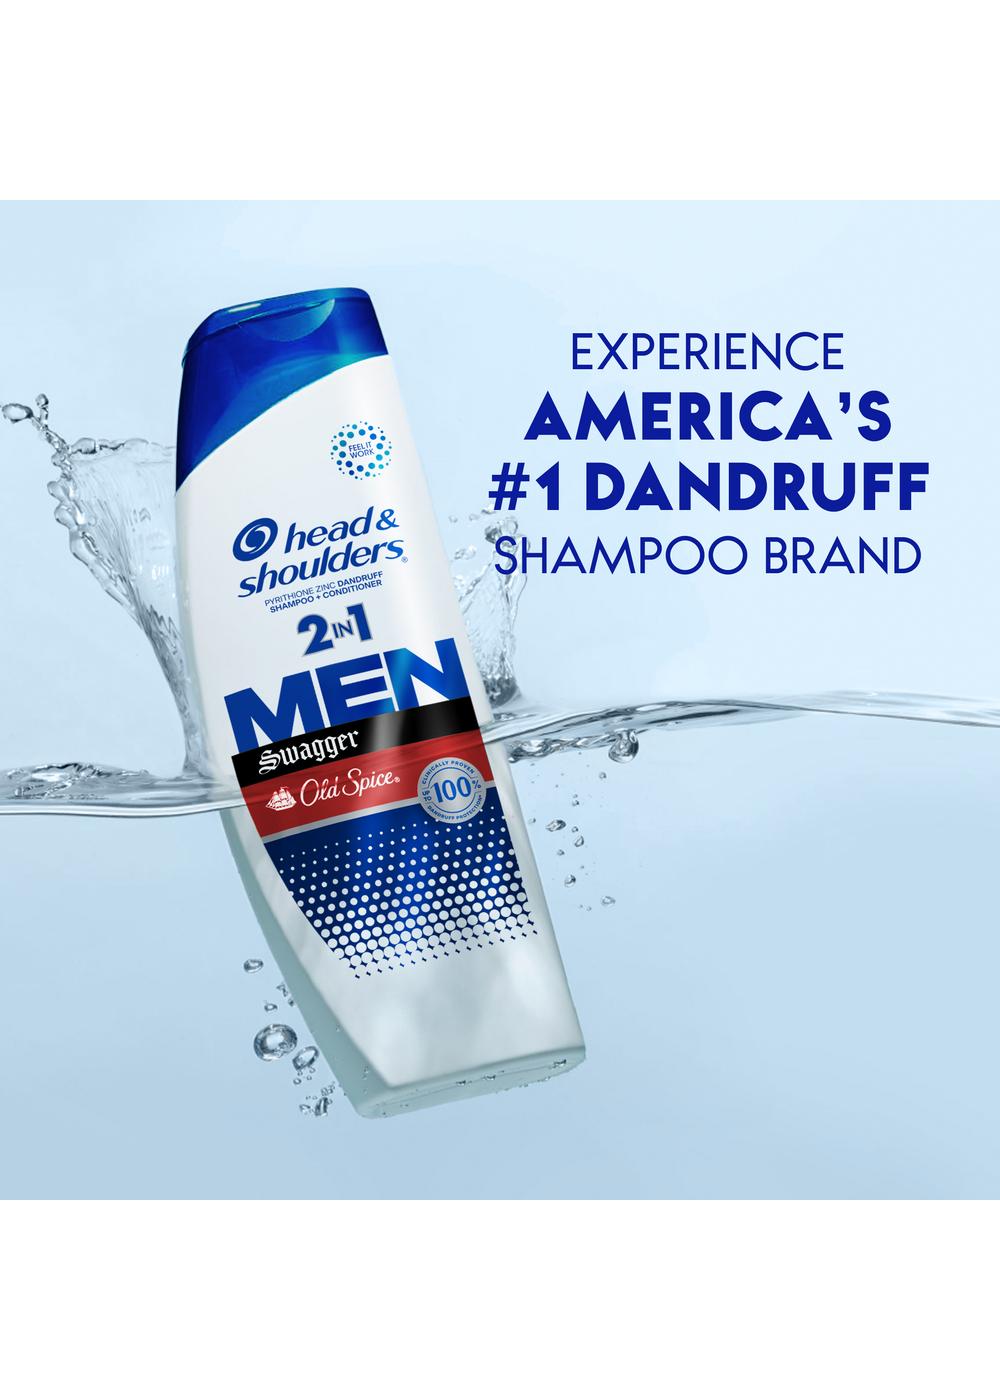 Head & Shoulders Old Spice 2 in 1 Men Dandruff Shampoo + Conditioner - Swagger; image 4 of 11